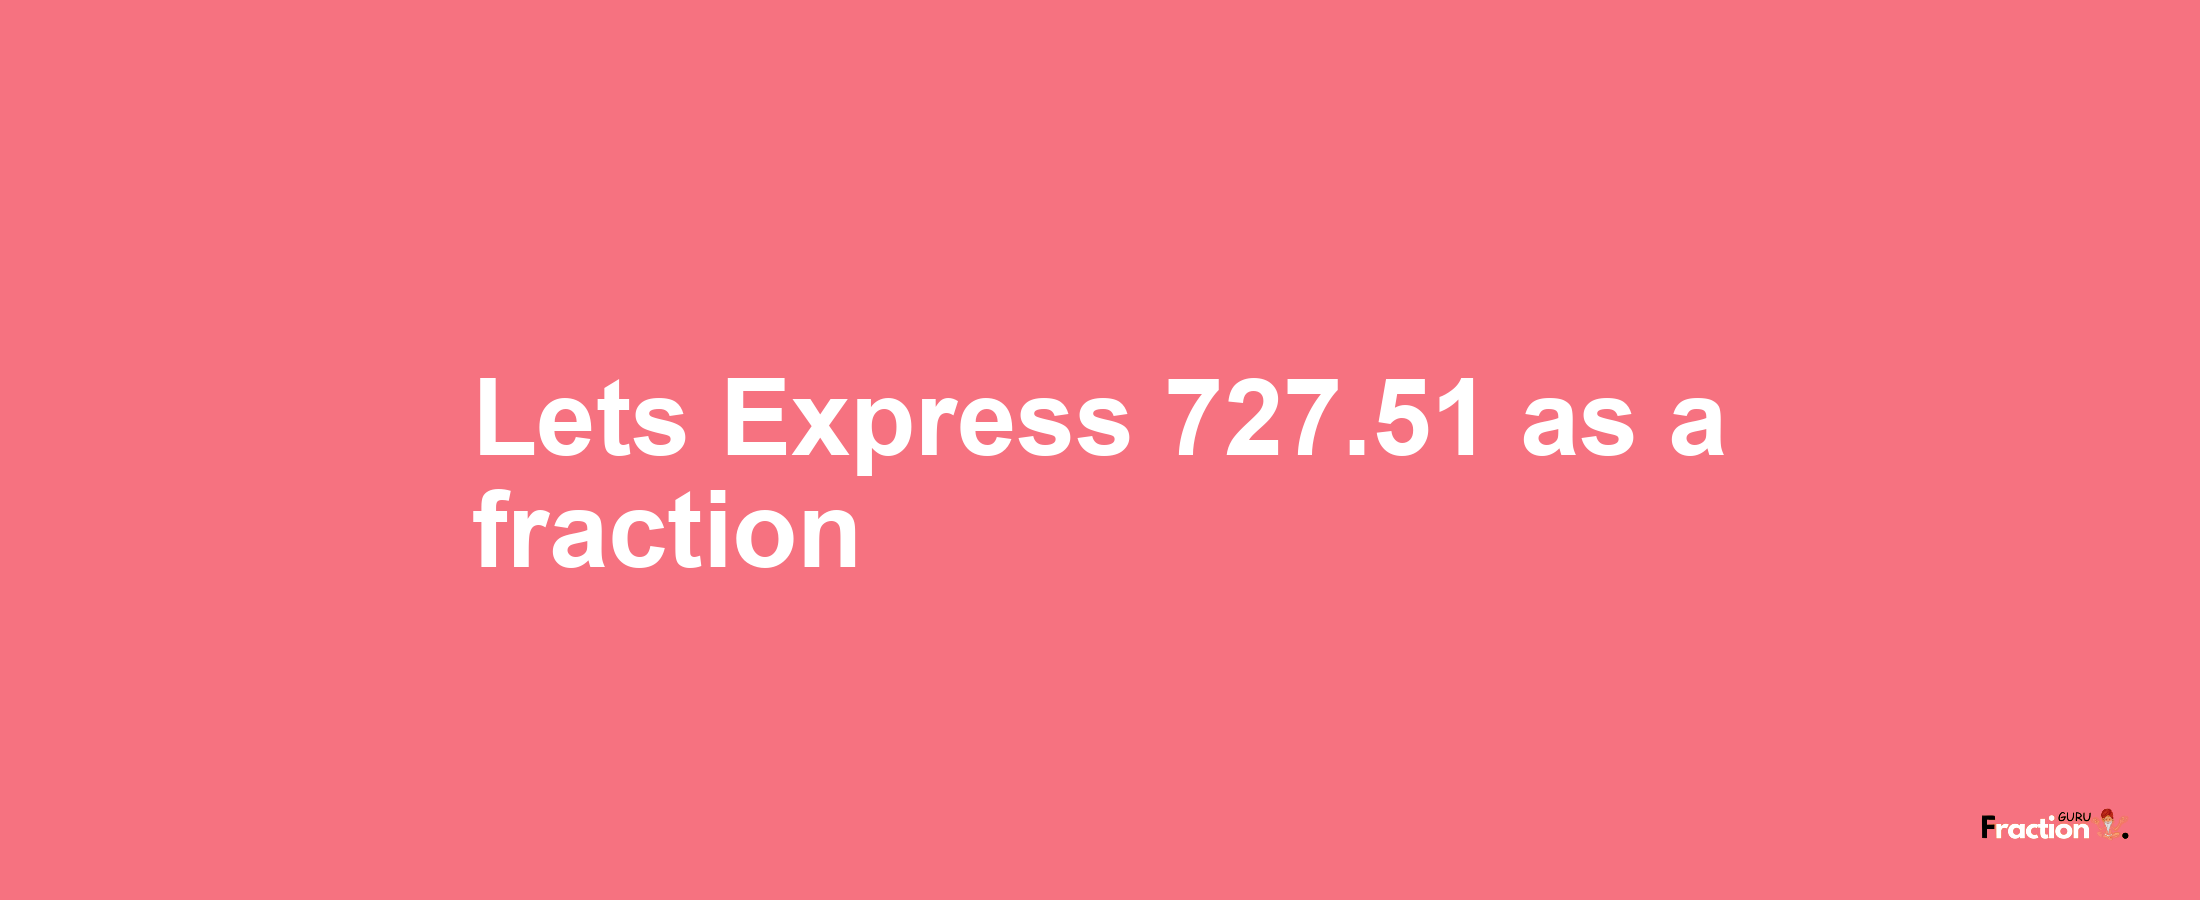 Lets Express 727.51 as afraction